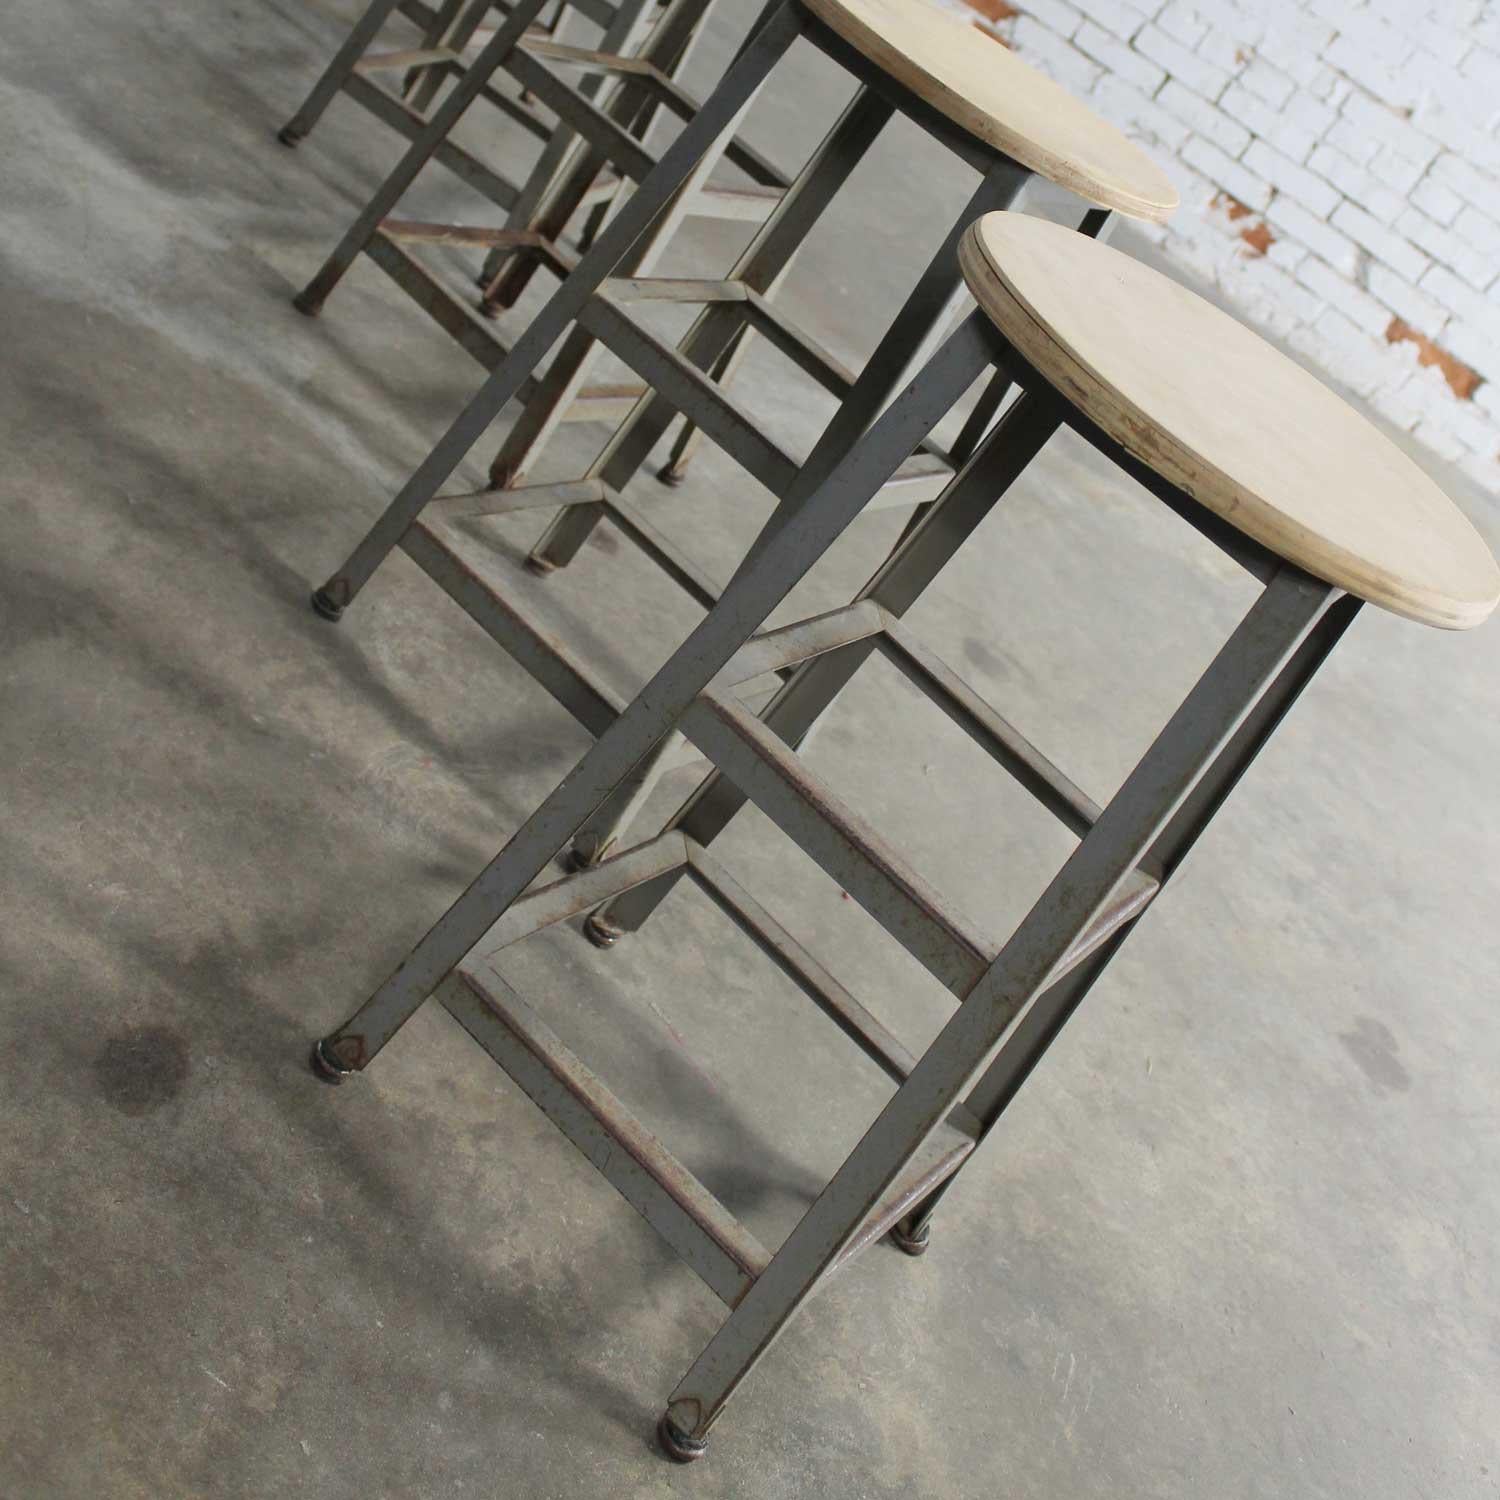 Industrial Counter Height Stools Vintage Patinated Steel Distressed Wood Seats (Patiniert)